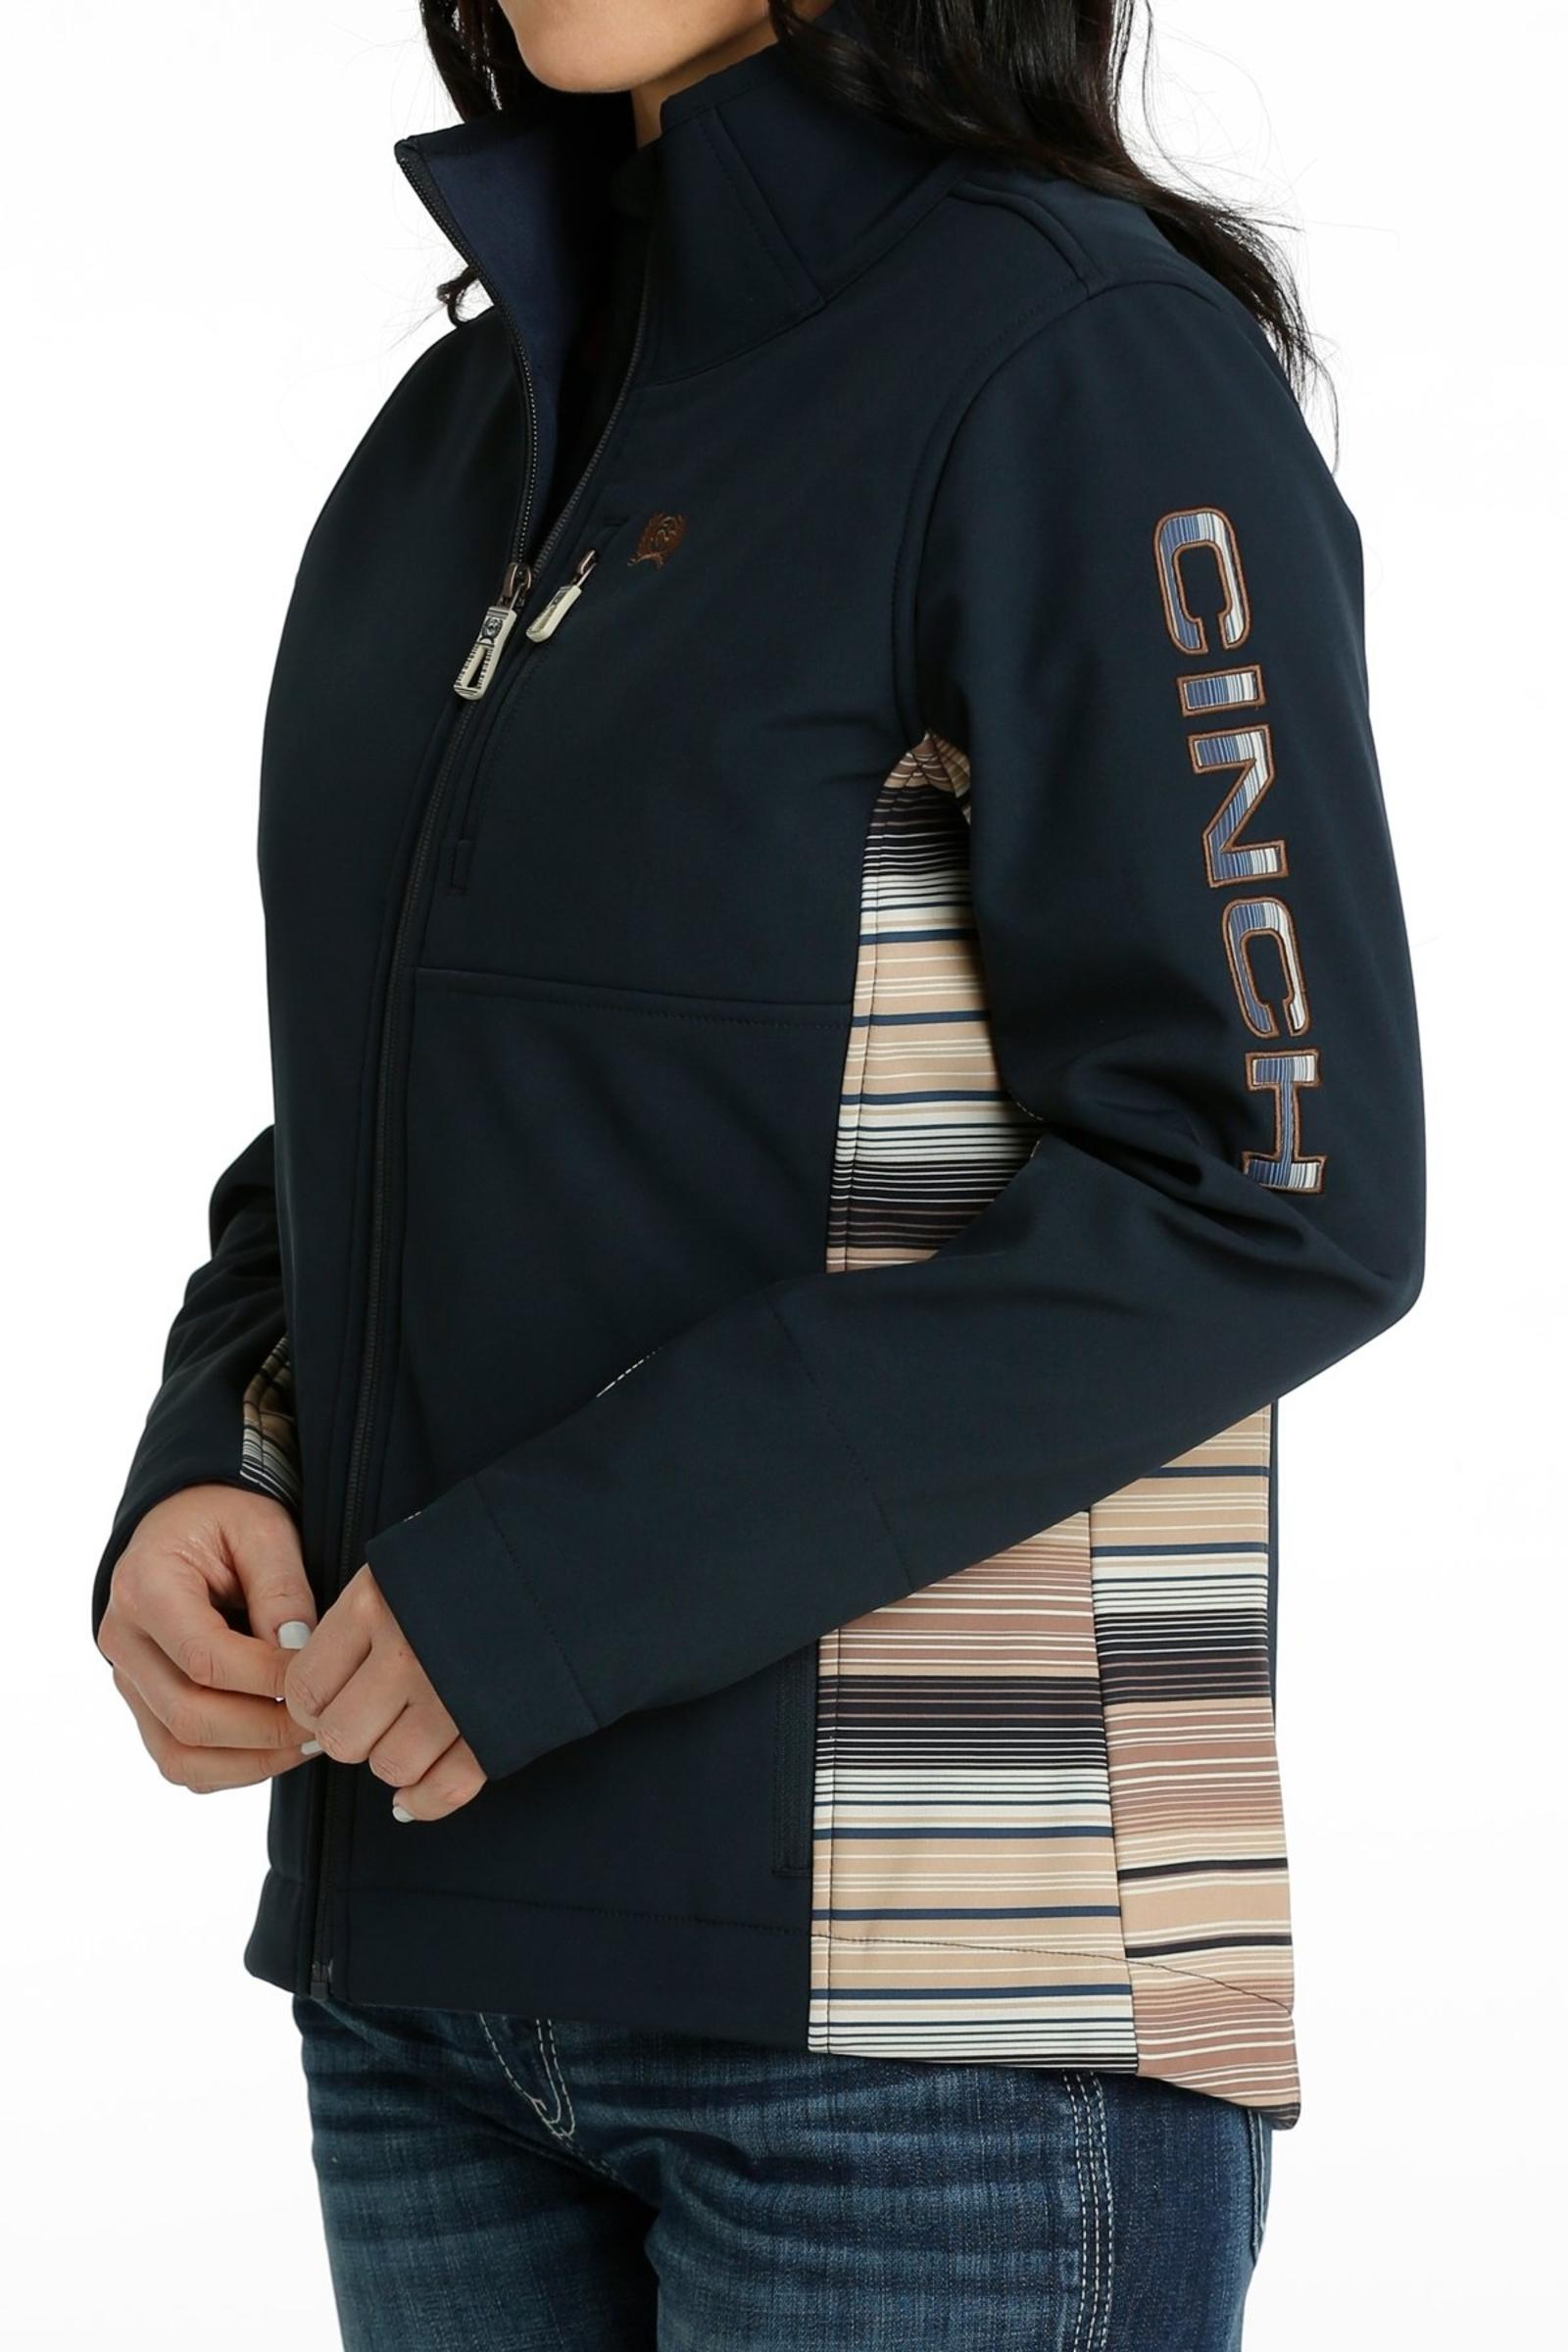 Women's Concealed Carry Bonded Jacket - Navy